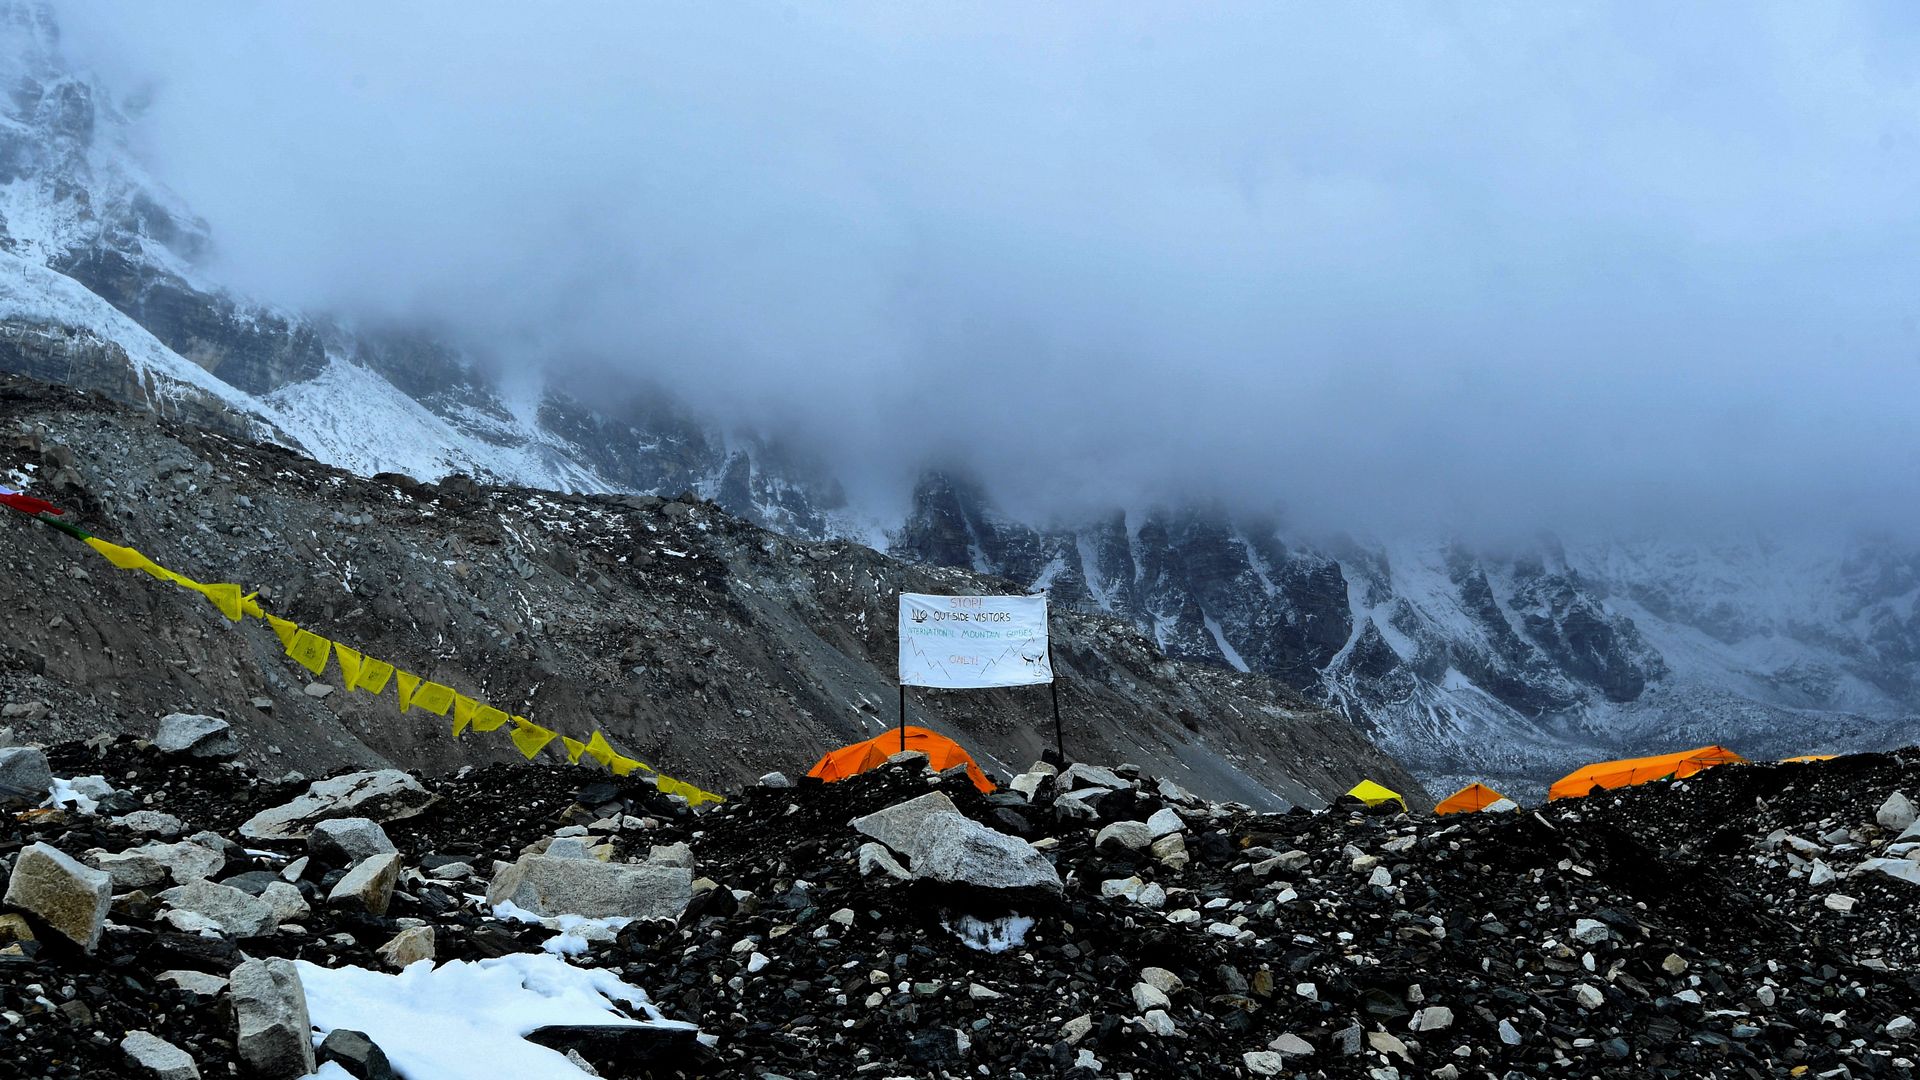 Picture of a sign in Everest that says "Stop ! No outside visitors. Intenrational Mountain Guides only !"